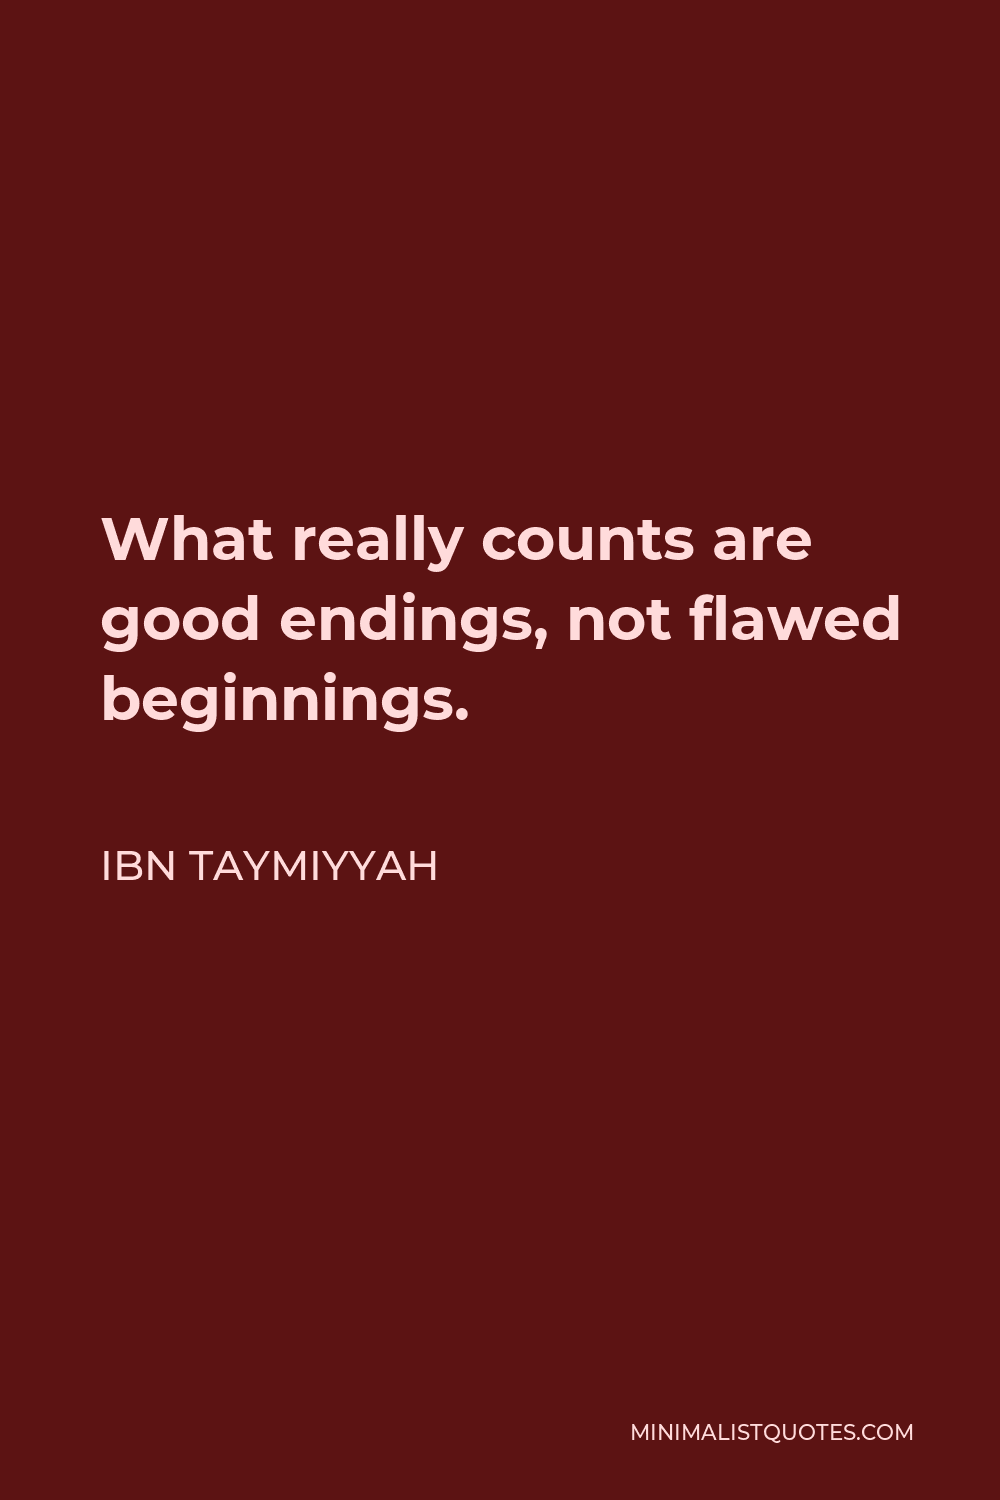 Ibn Taymiyyah Quote - What really counts are good endings, not flawed beginnings.